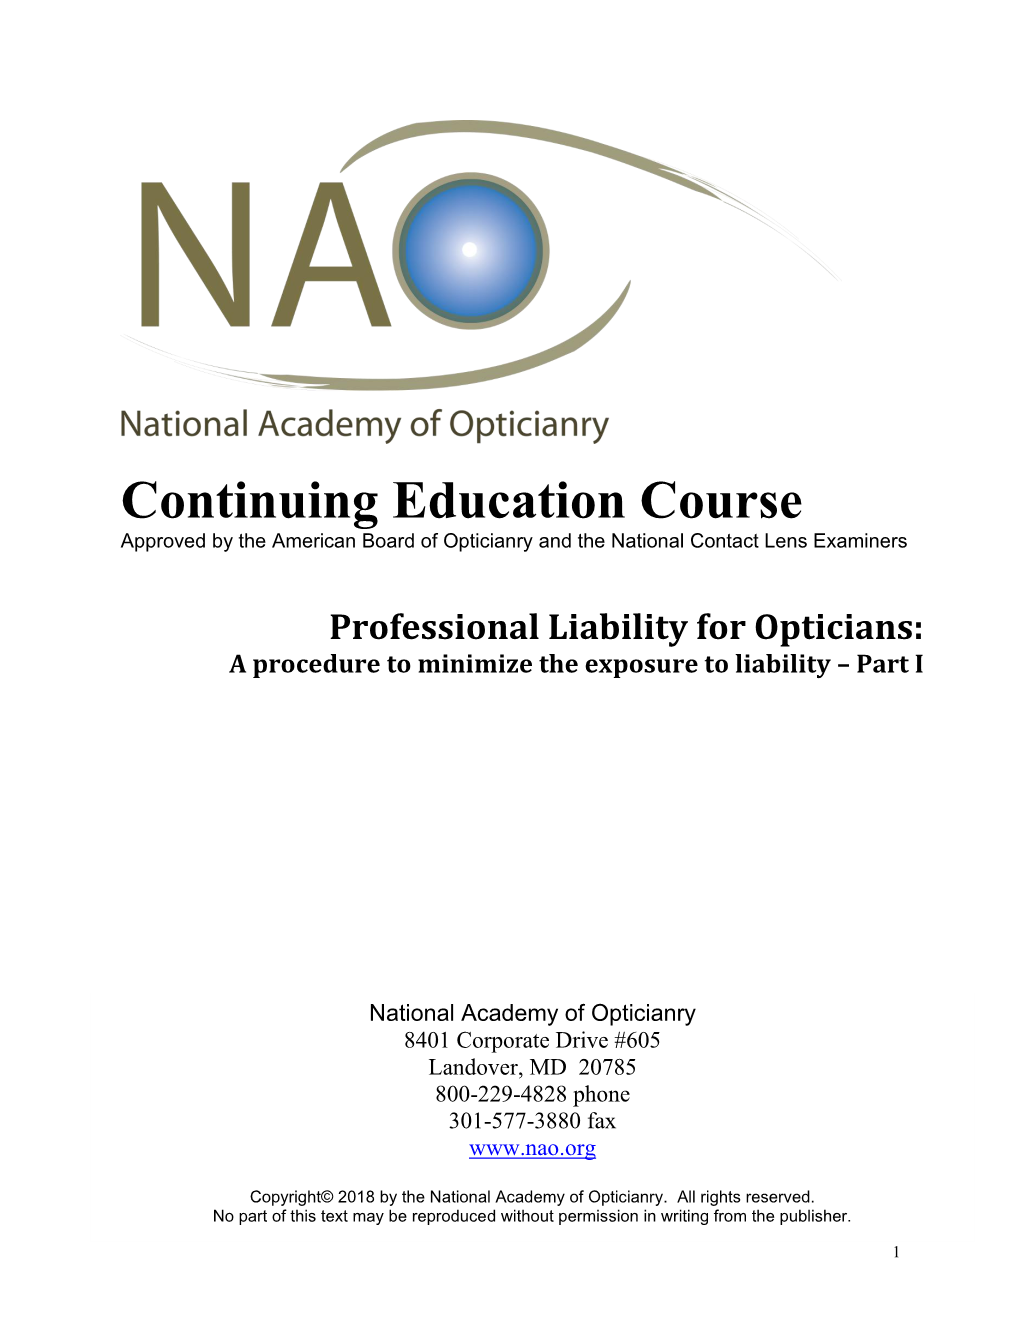 Professional Liability for Opticians